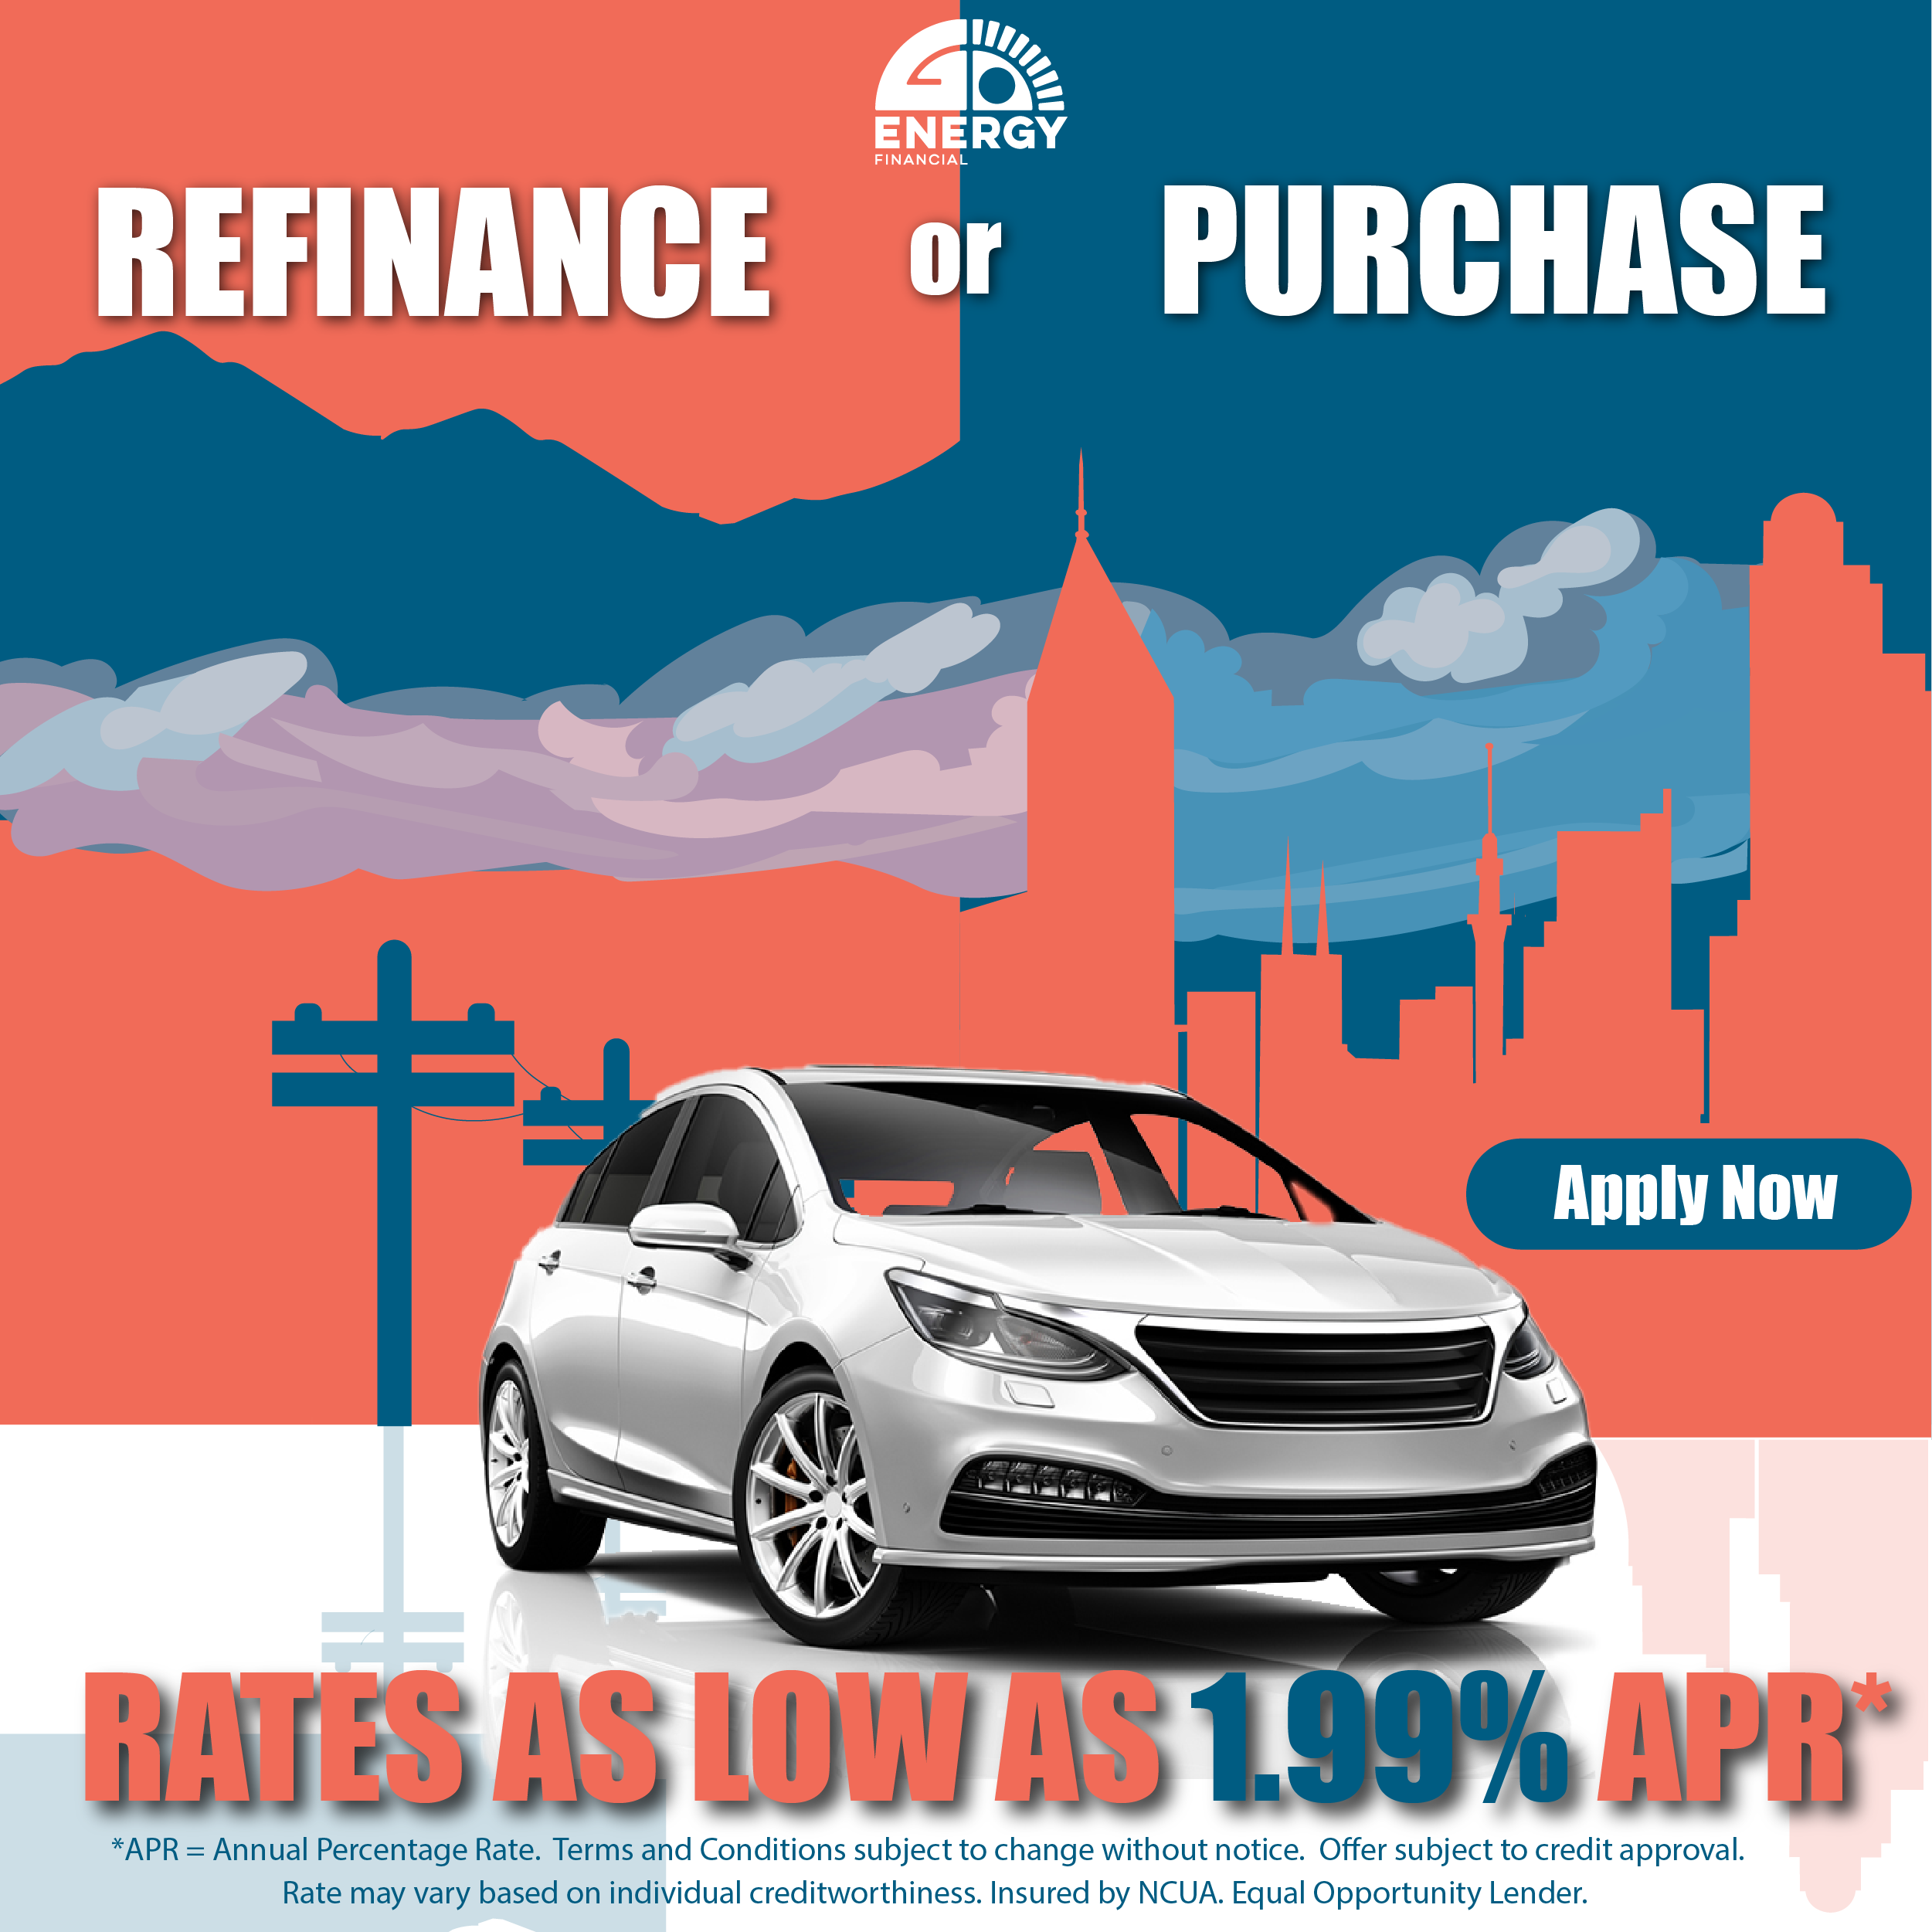 Refinance or purchase an auto loan with rates as low as 1.99% APR* Certain restrictions apply Click to apply